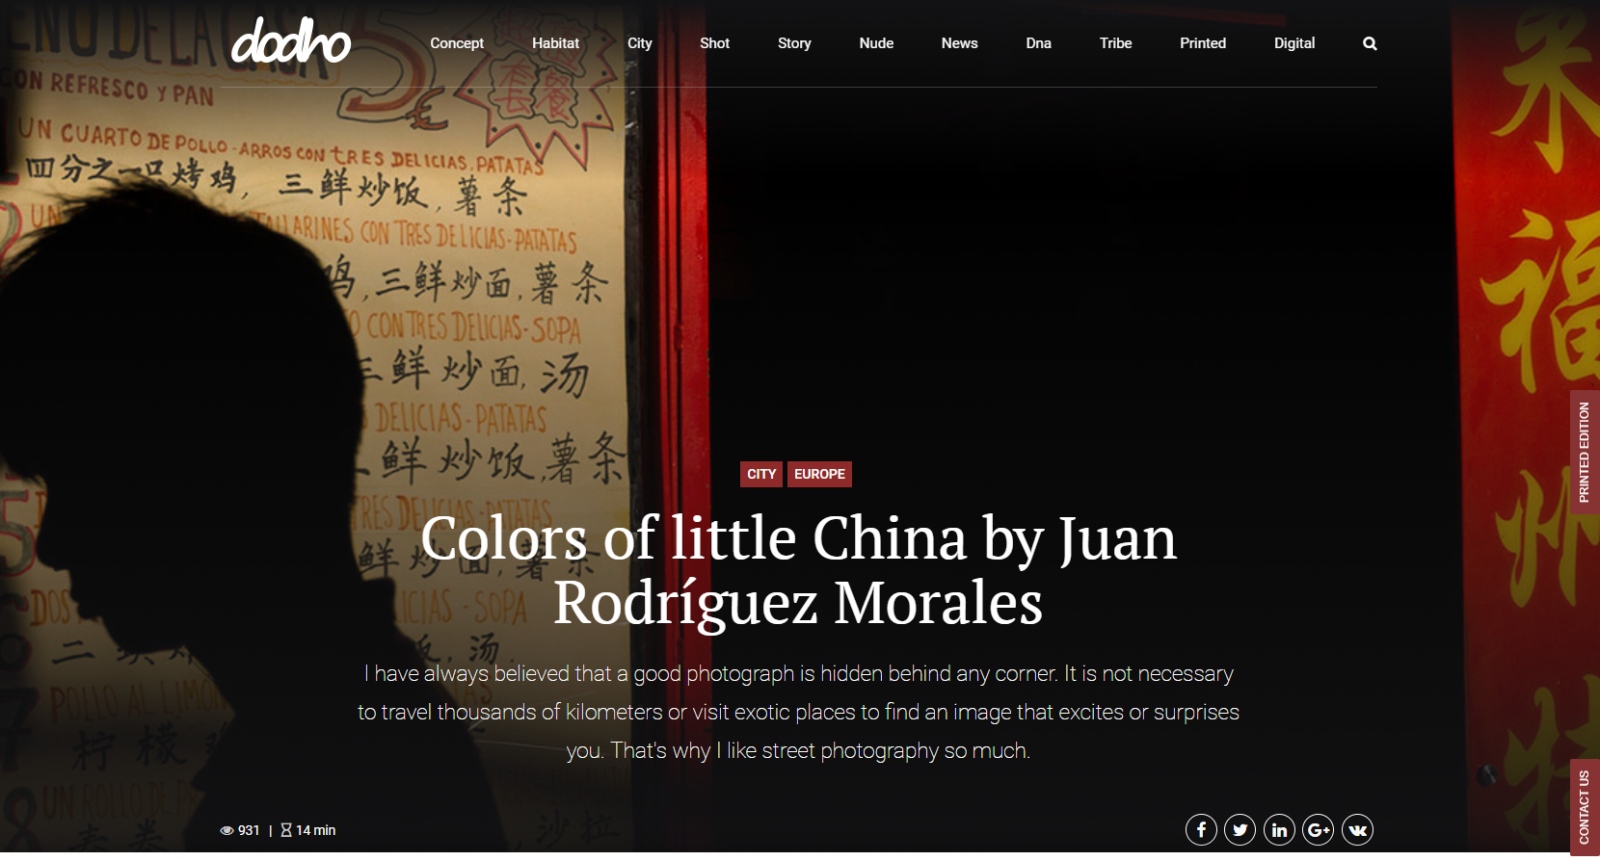 "Colors of Little China" on Dodho Magazine